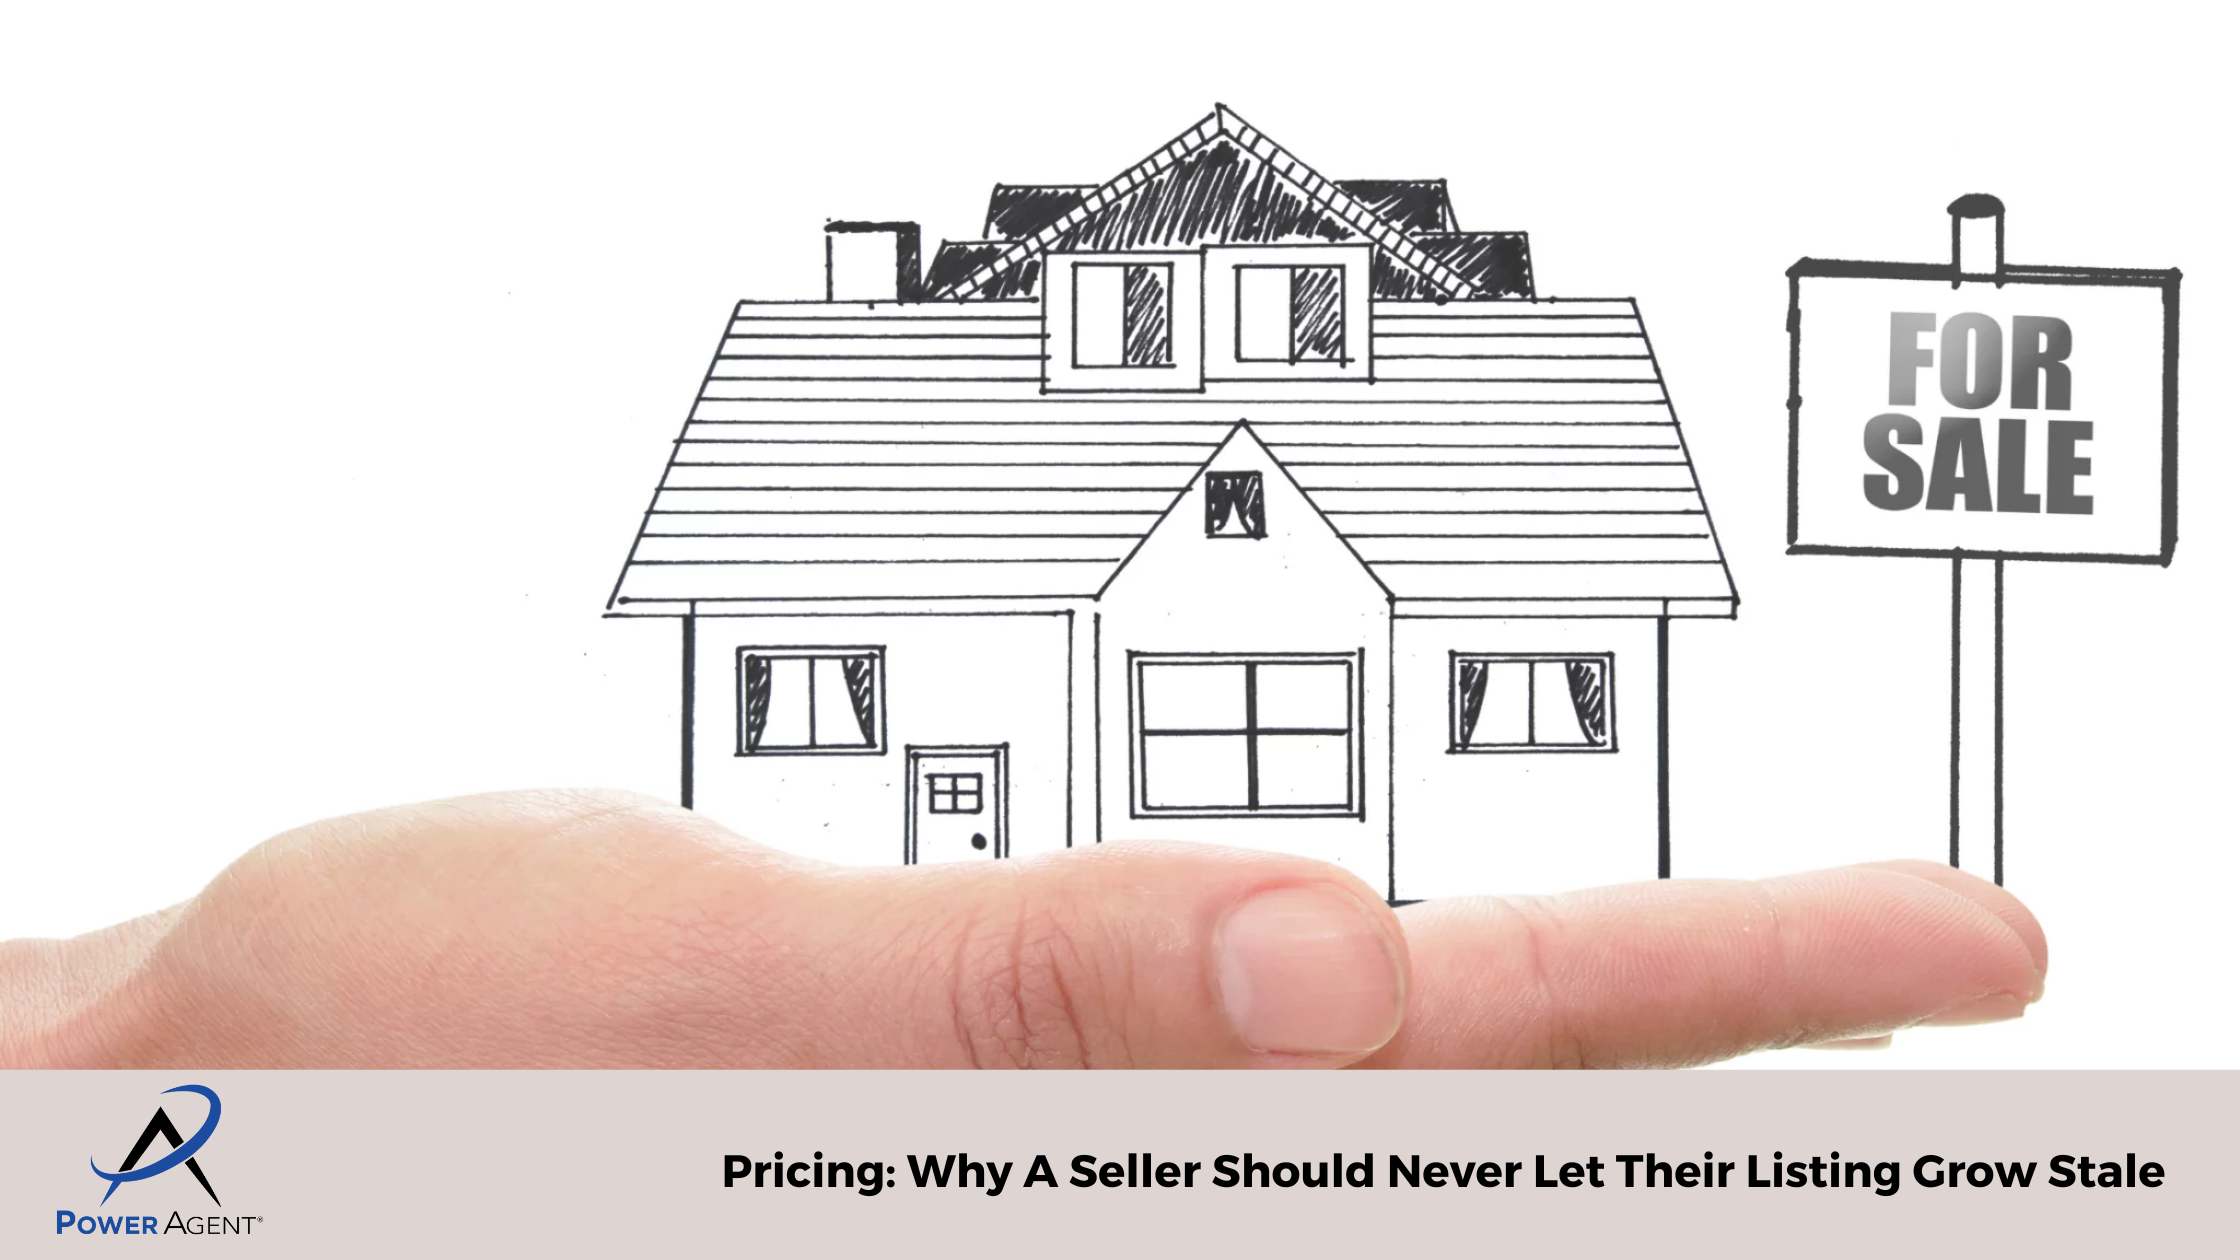 Pricing: Why A Seller Should Never Let Their Listing Grow Stale